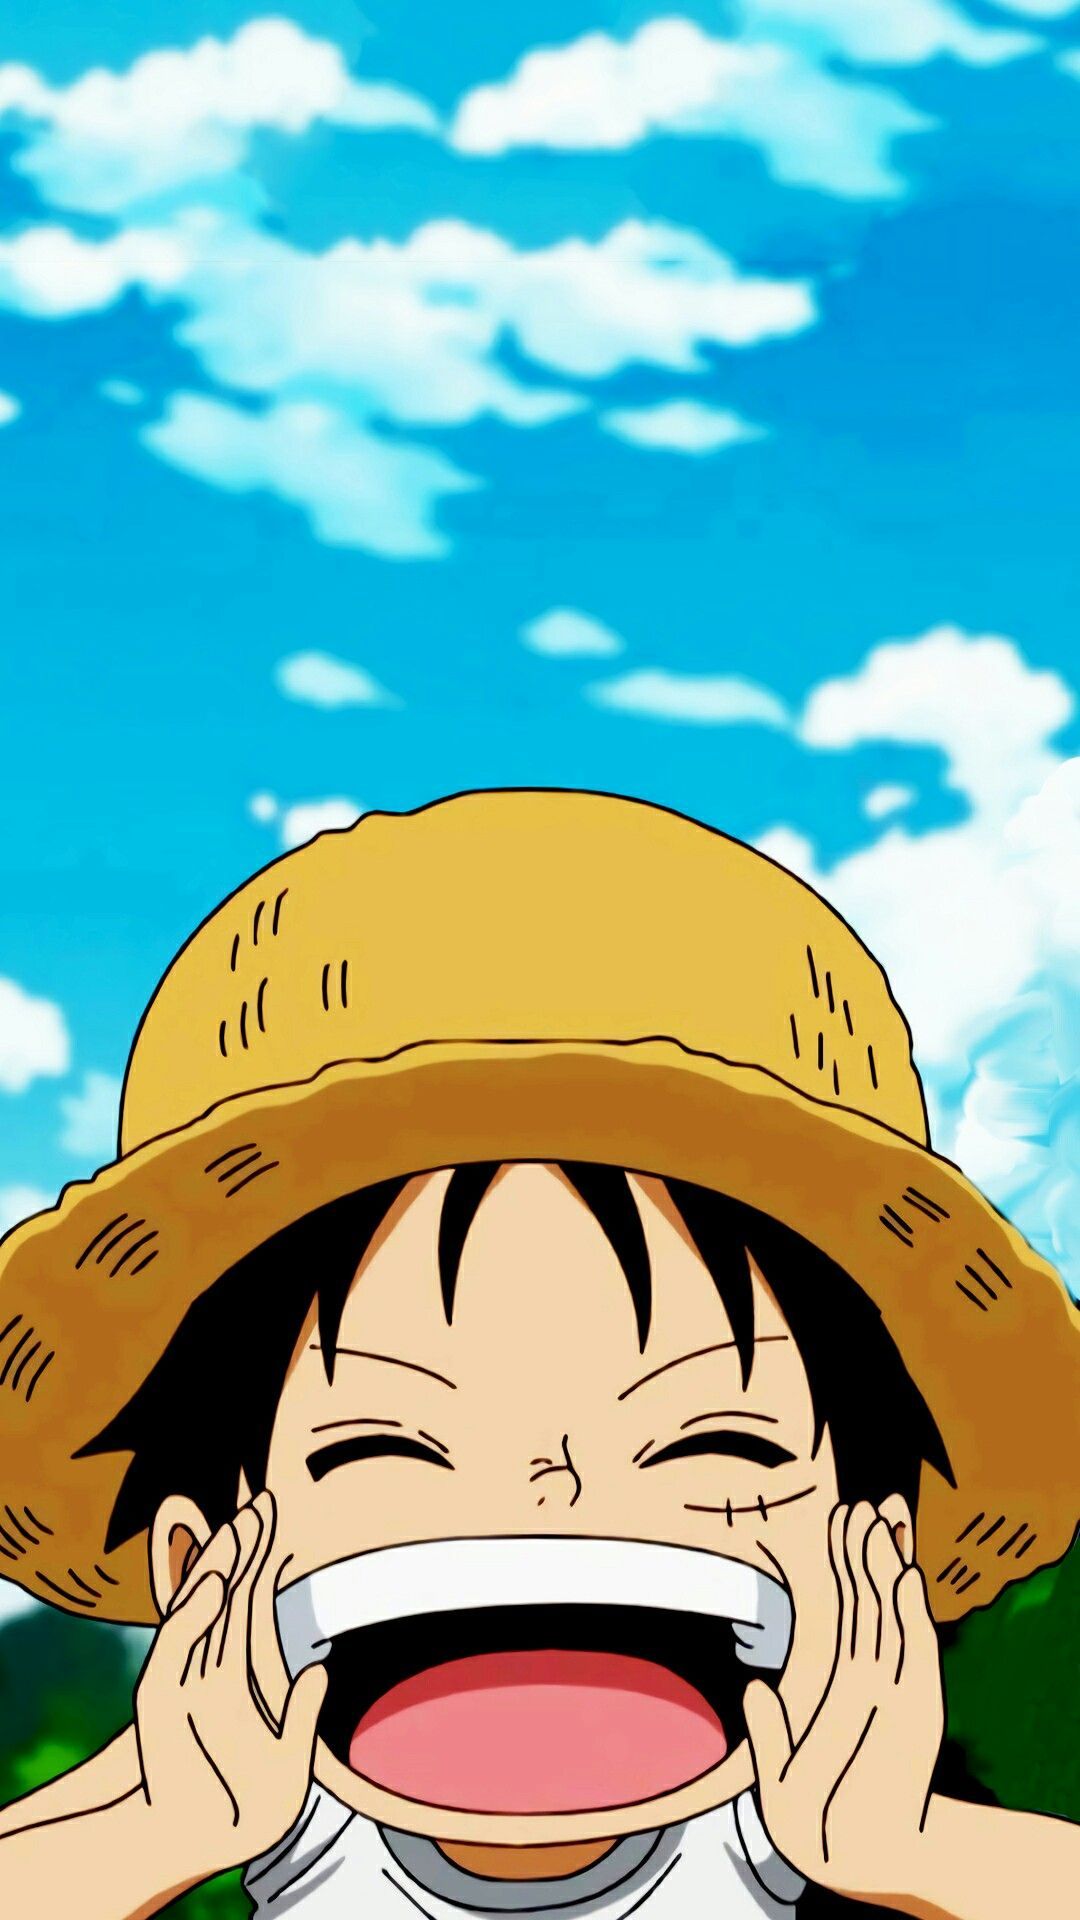 Wallpaper Luffy / Monkey D Luffy Mobile Wallpaper 1125x2436 Made In